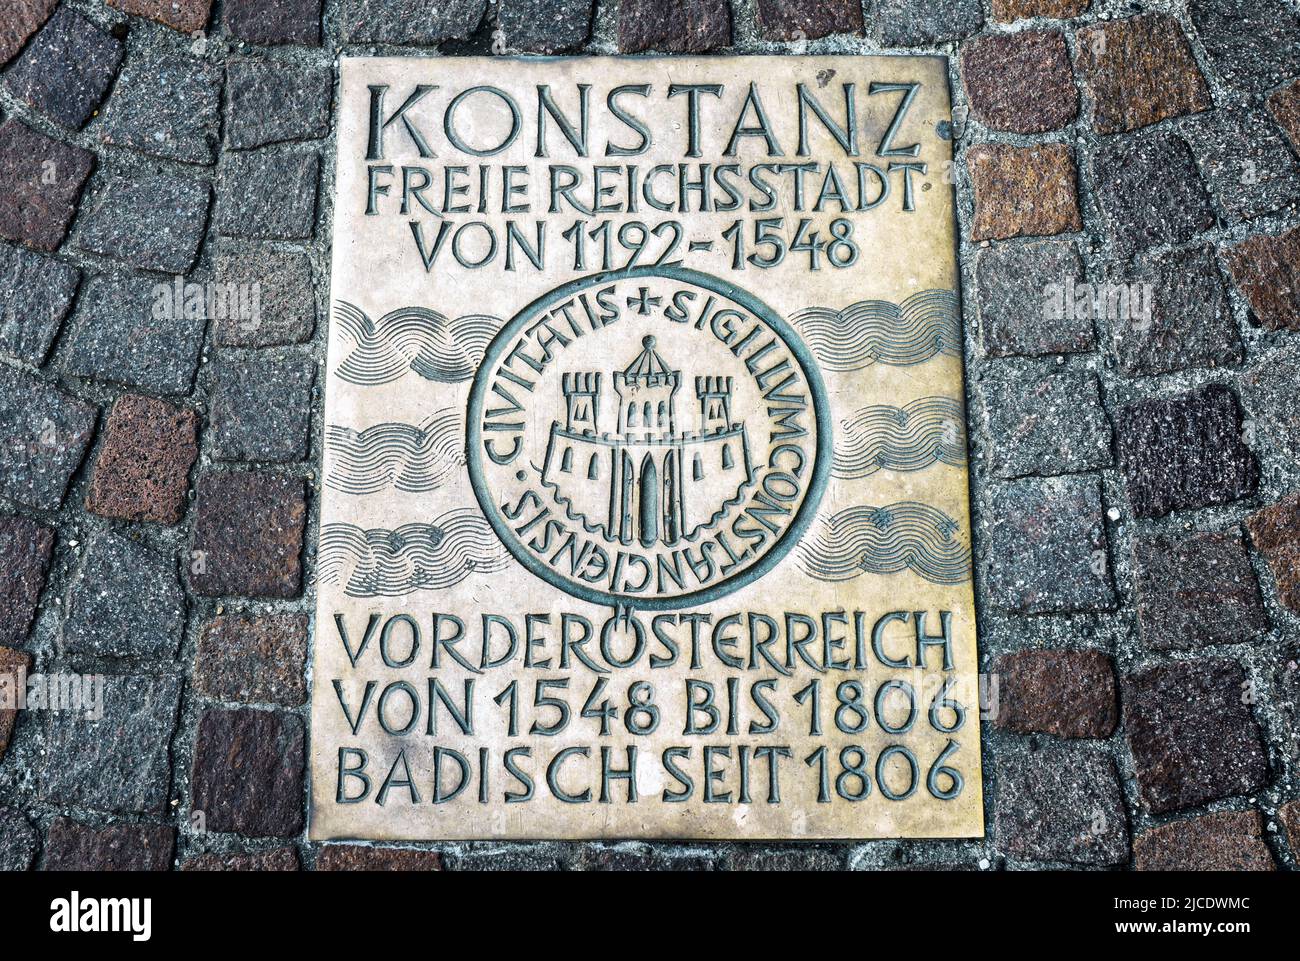 Cobblestone pavement in Constance (Konstanz), Germany. Metal plate on road in old town of Constance. Translation: Constance is free city from 1192, pa Stock Photo